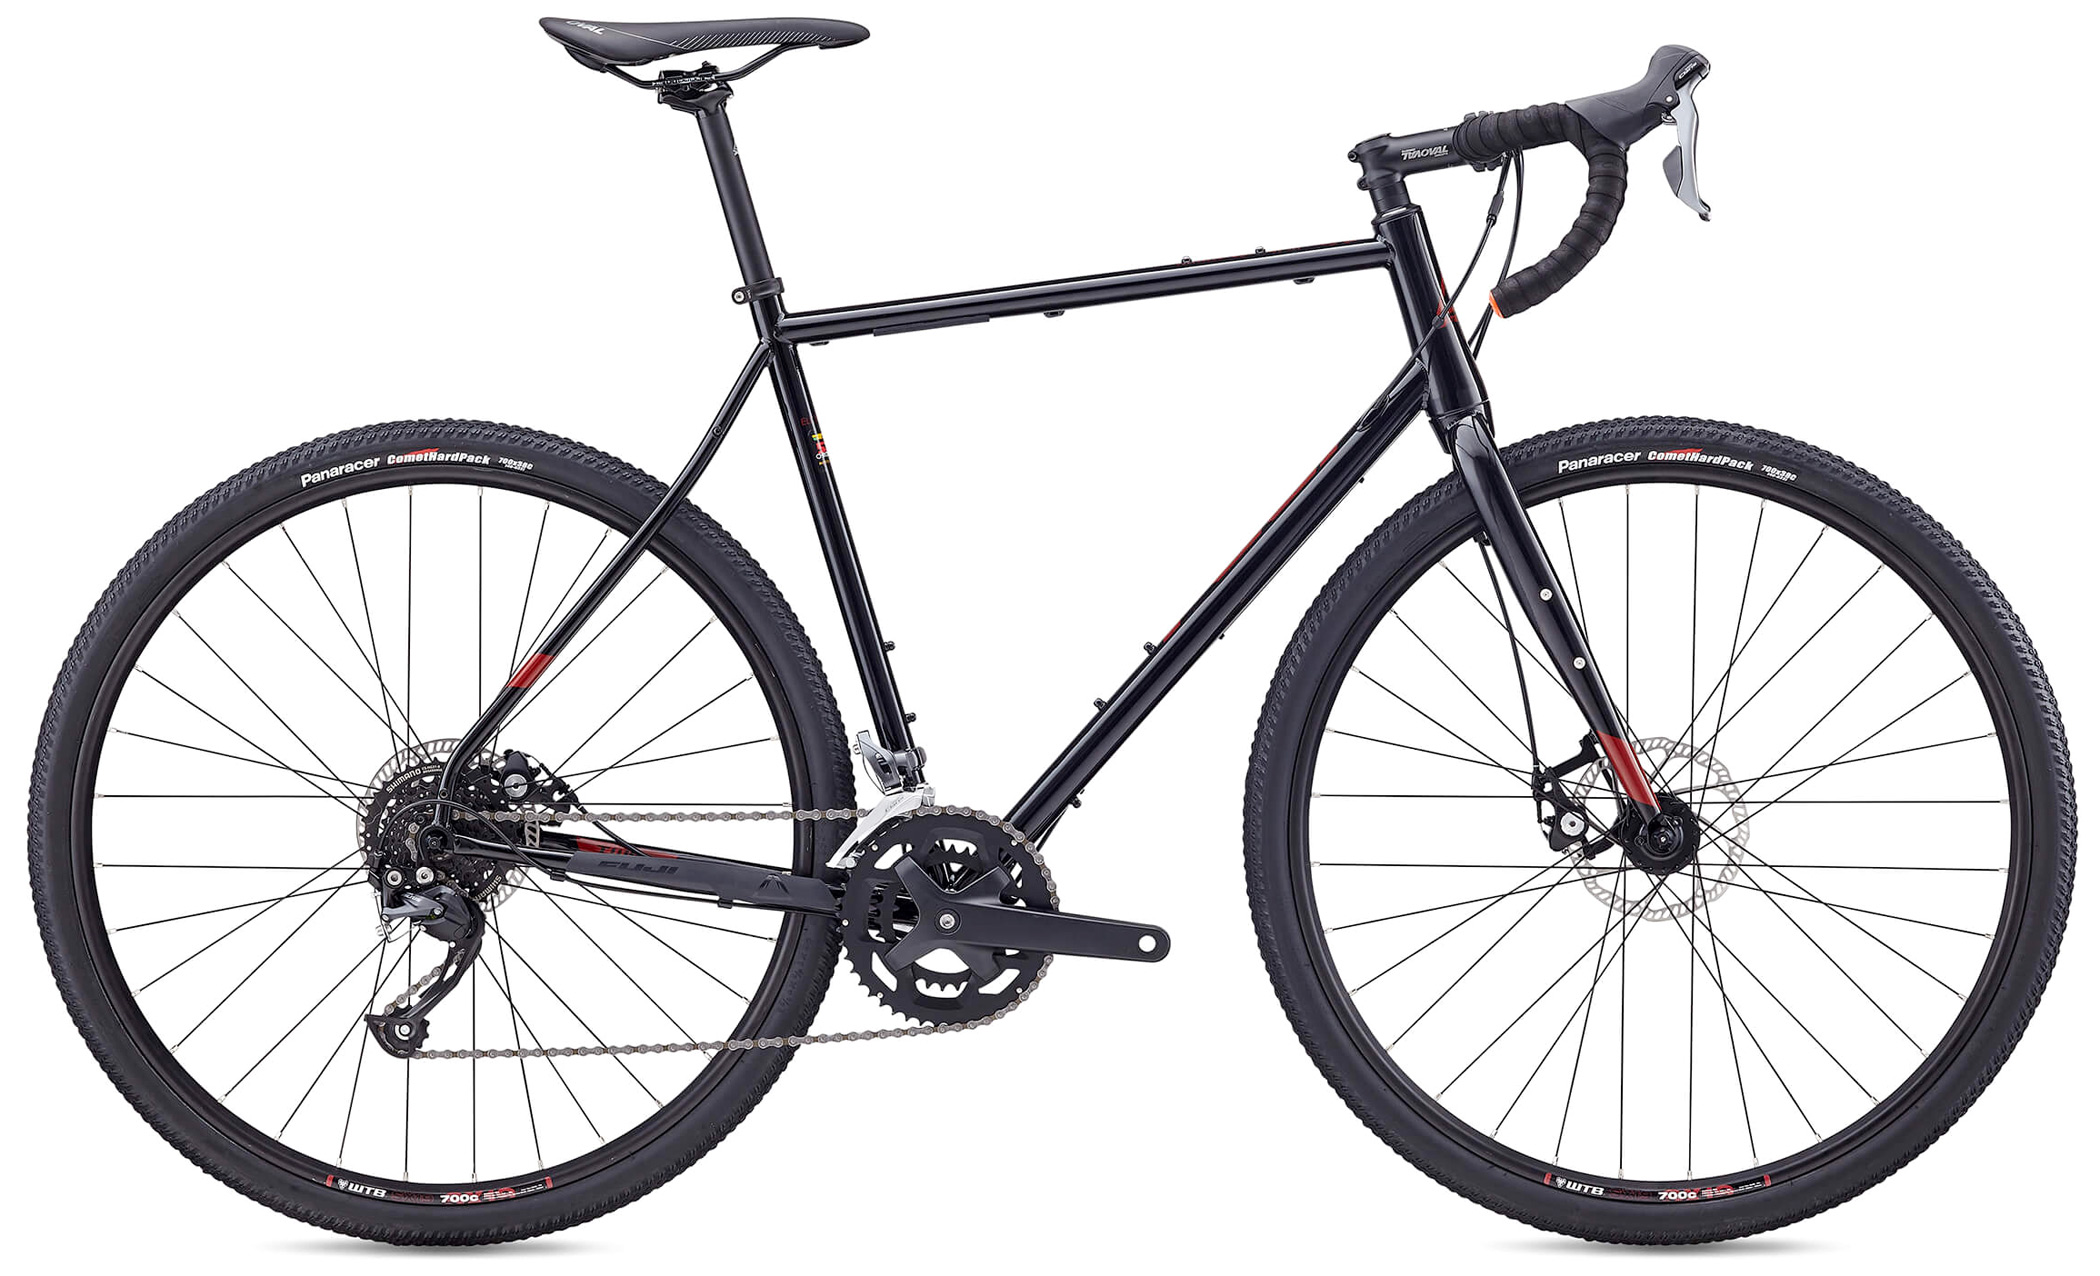 Save Up To 60% Off Adventure/Tour/GravelRoad Bikes - Cyclocross